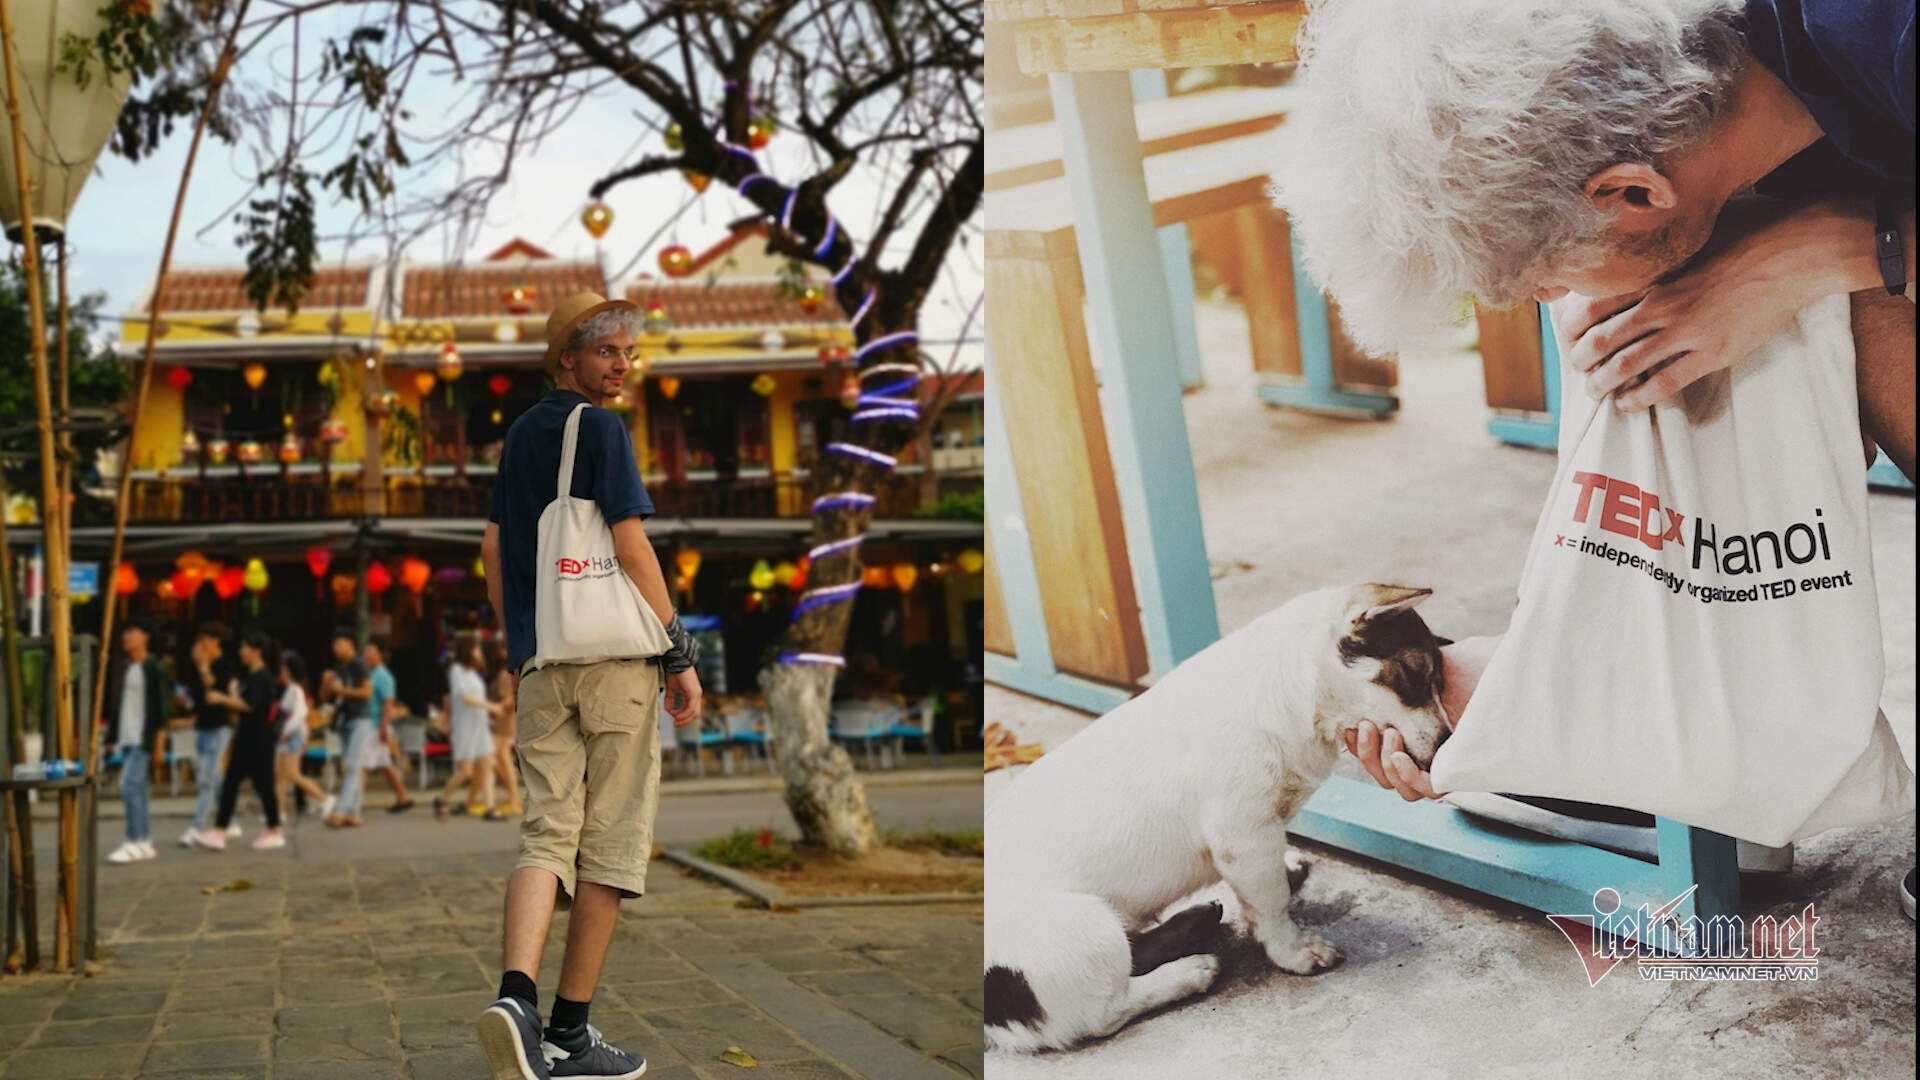 Hoi An says ‘no’ to dog, cat meat, decision applauded by foreign travelers